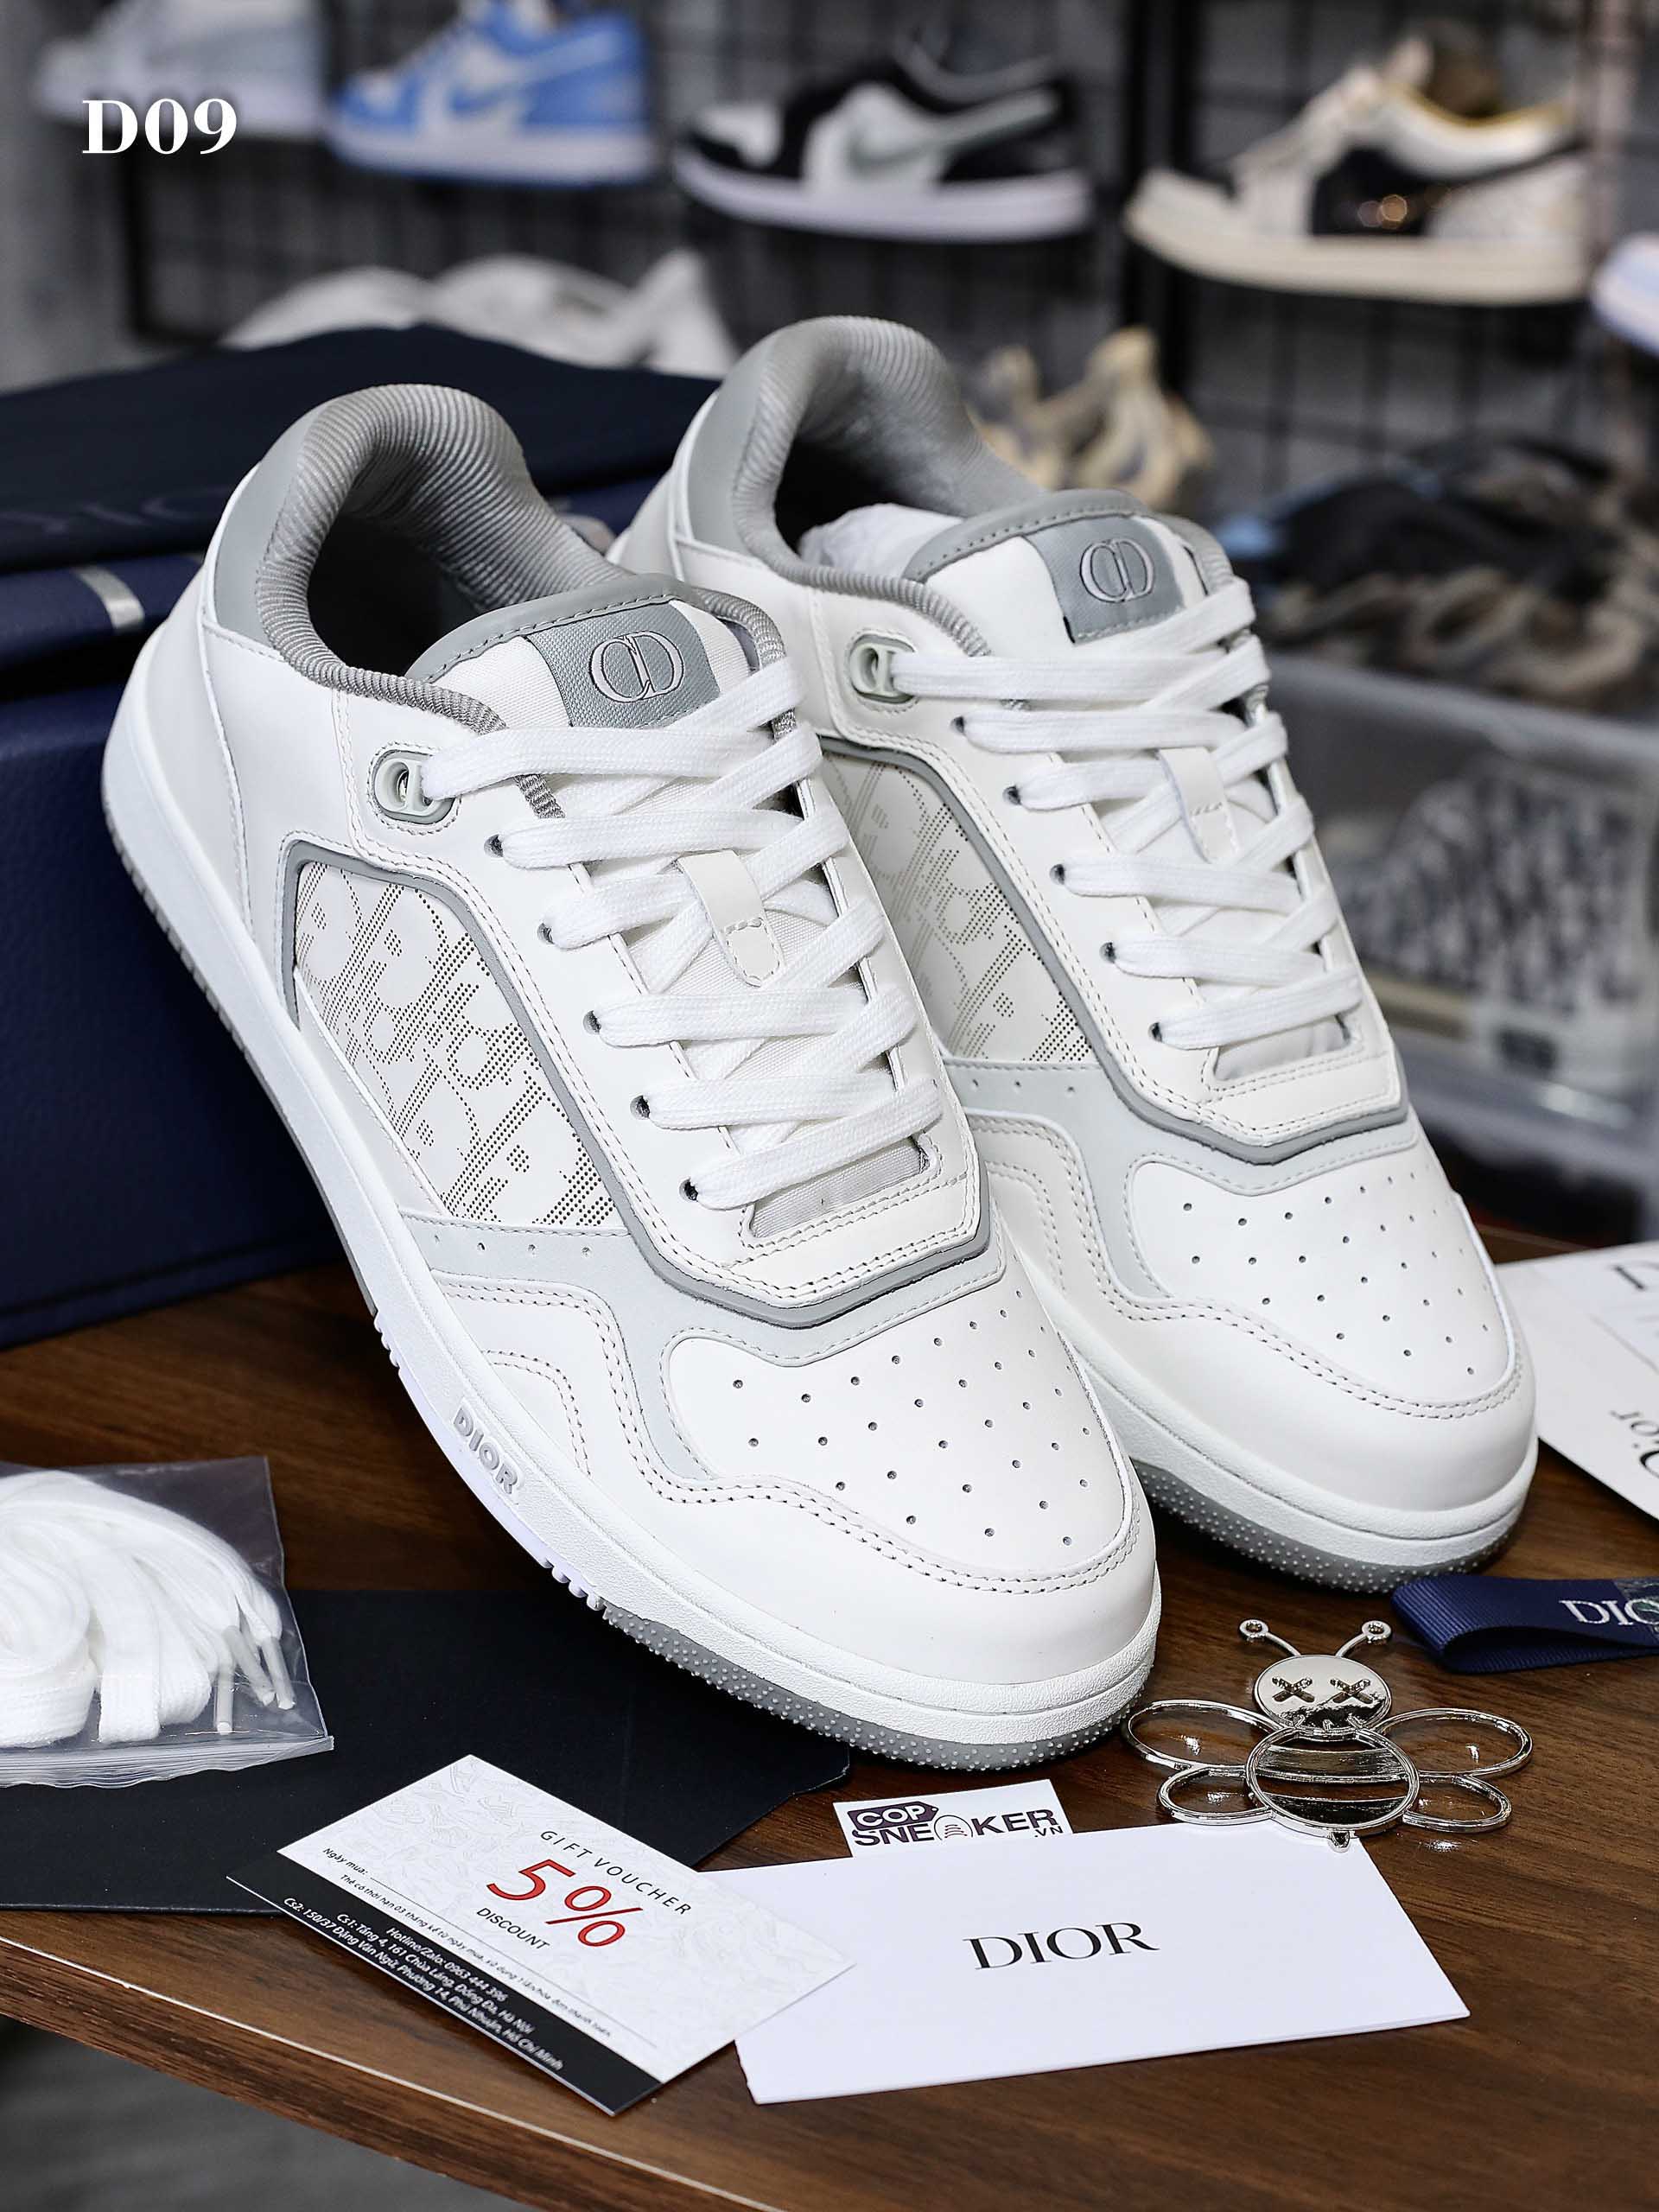 Giày Dior B27 Low white gray họa tiết Dior Oblique Galaxy Leather Xám Trắng Like Auth